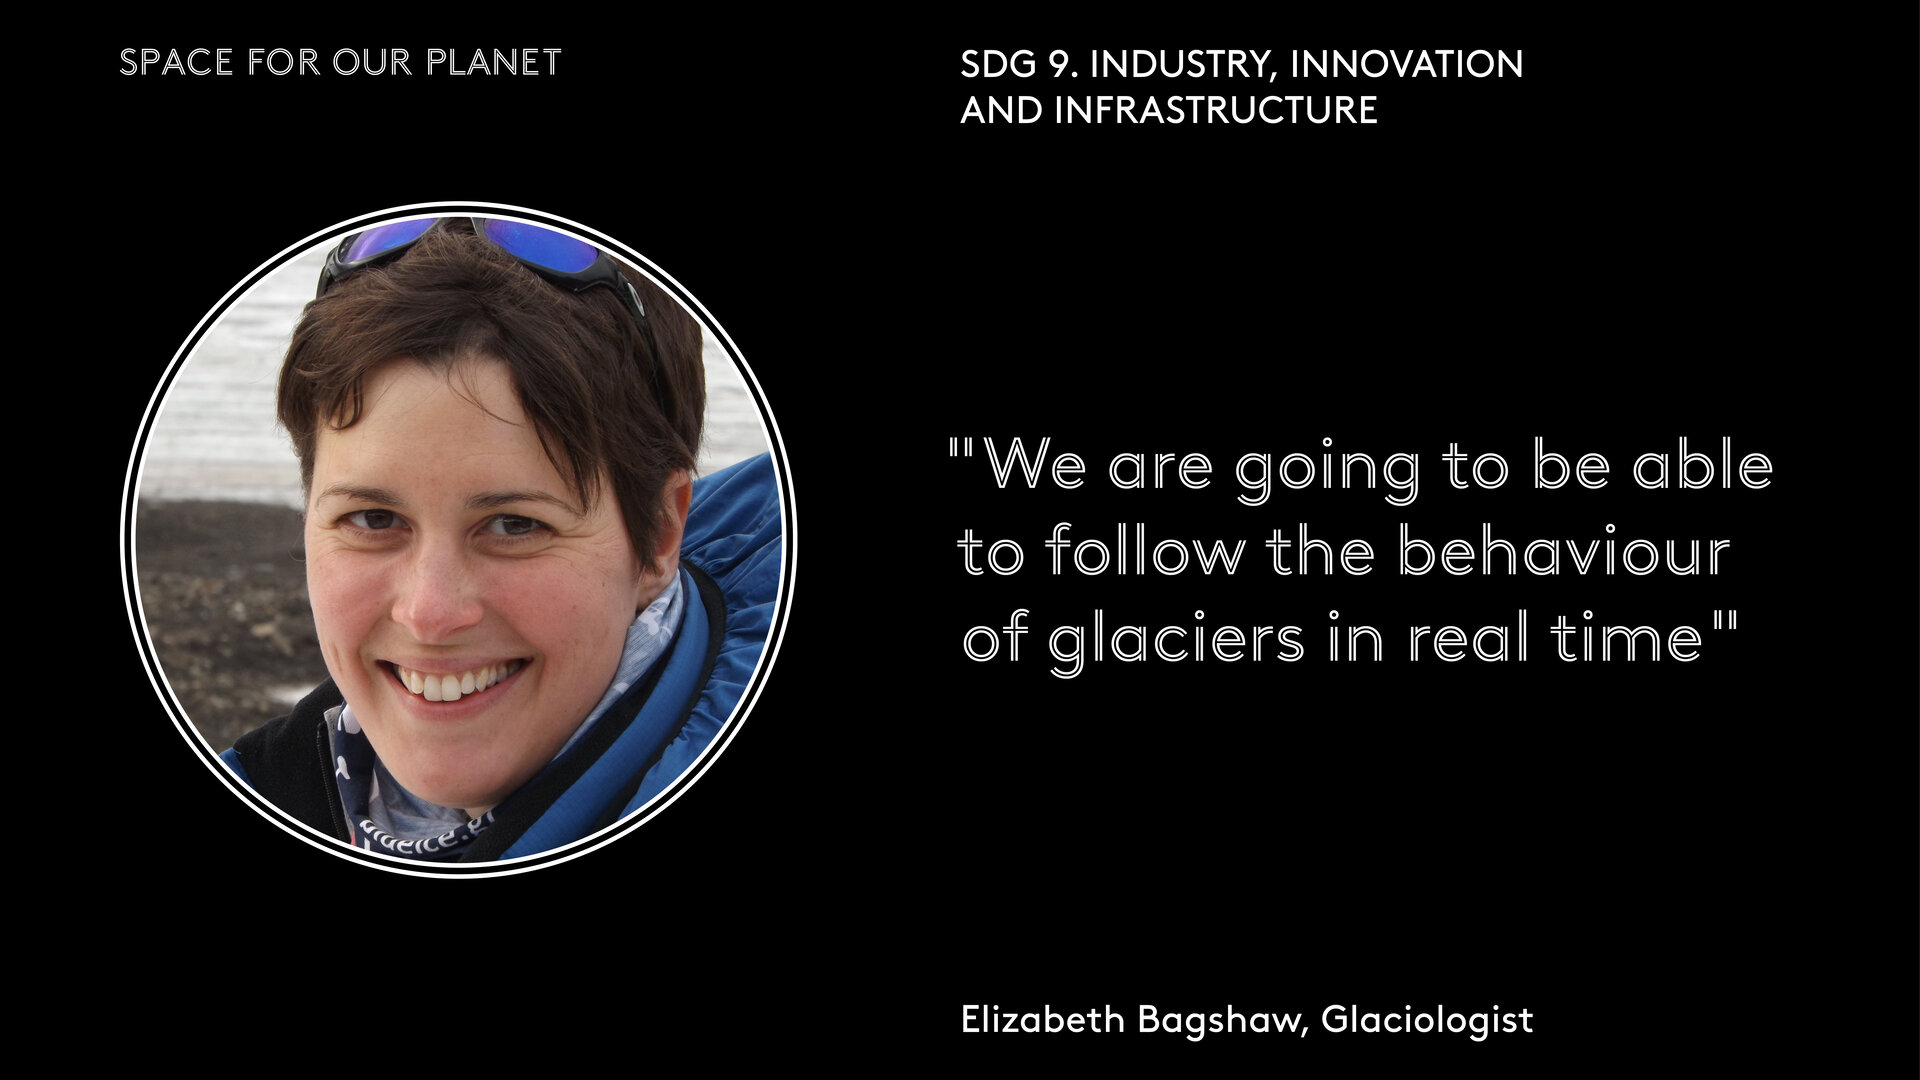 "We are going to be able to follow the behaviour of glaciers in real time"